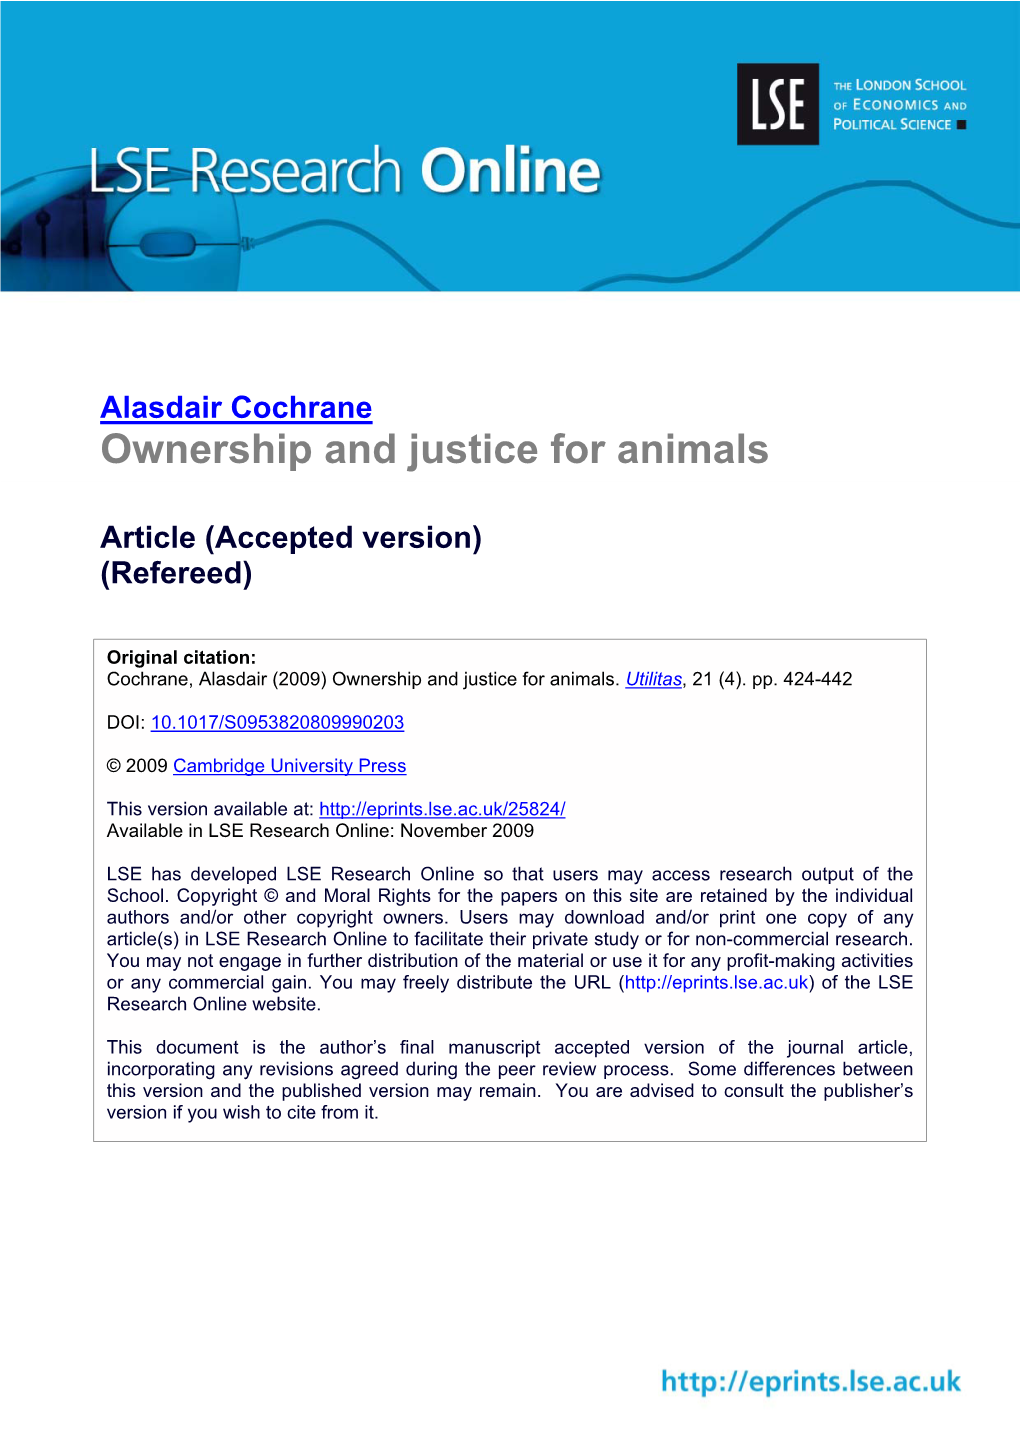 Ownership and Justice for Animals